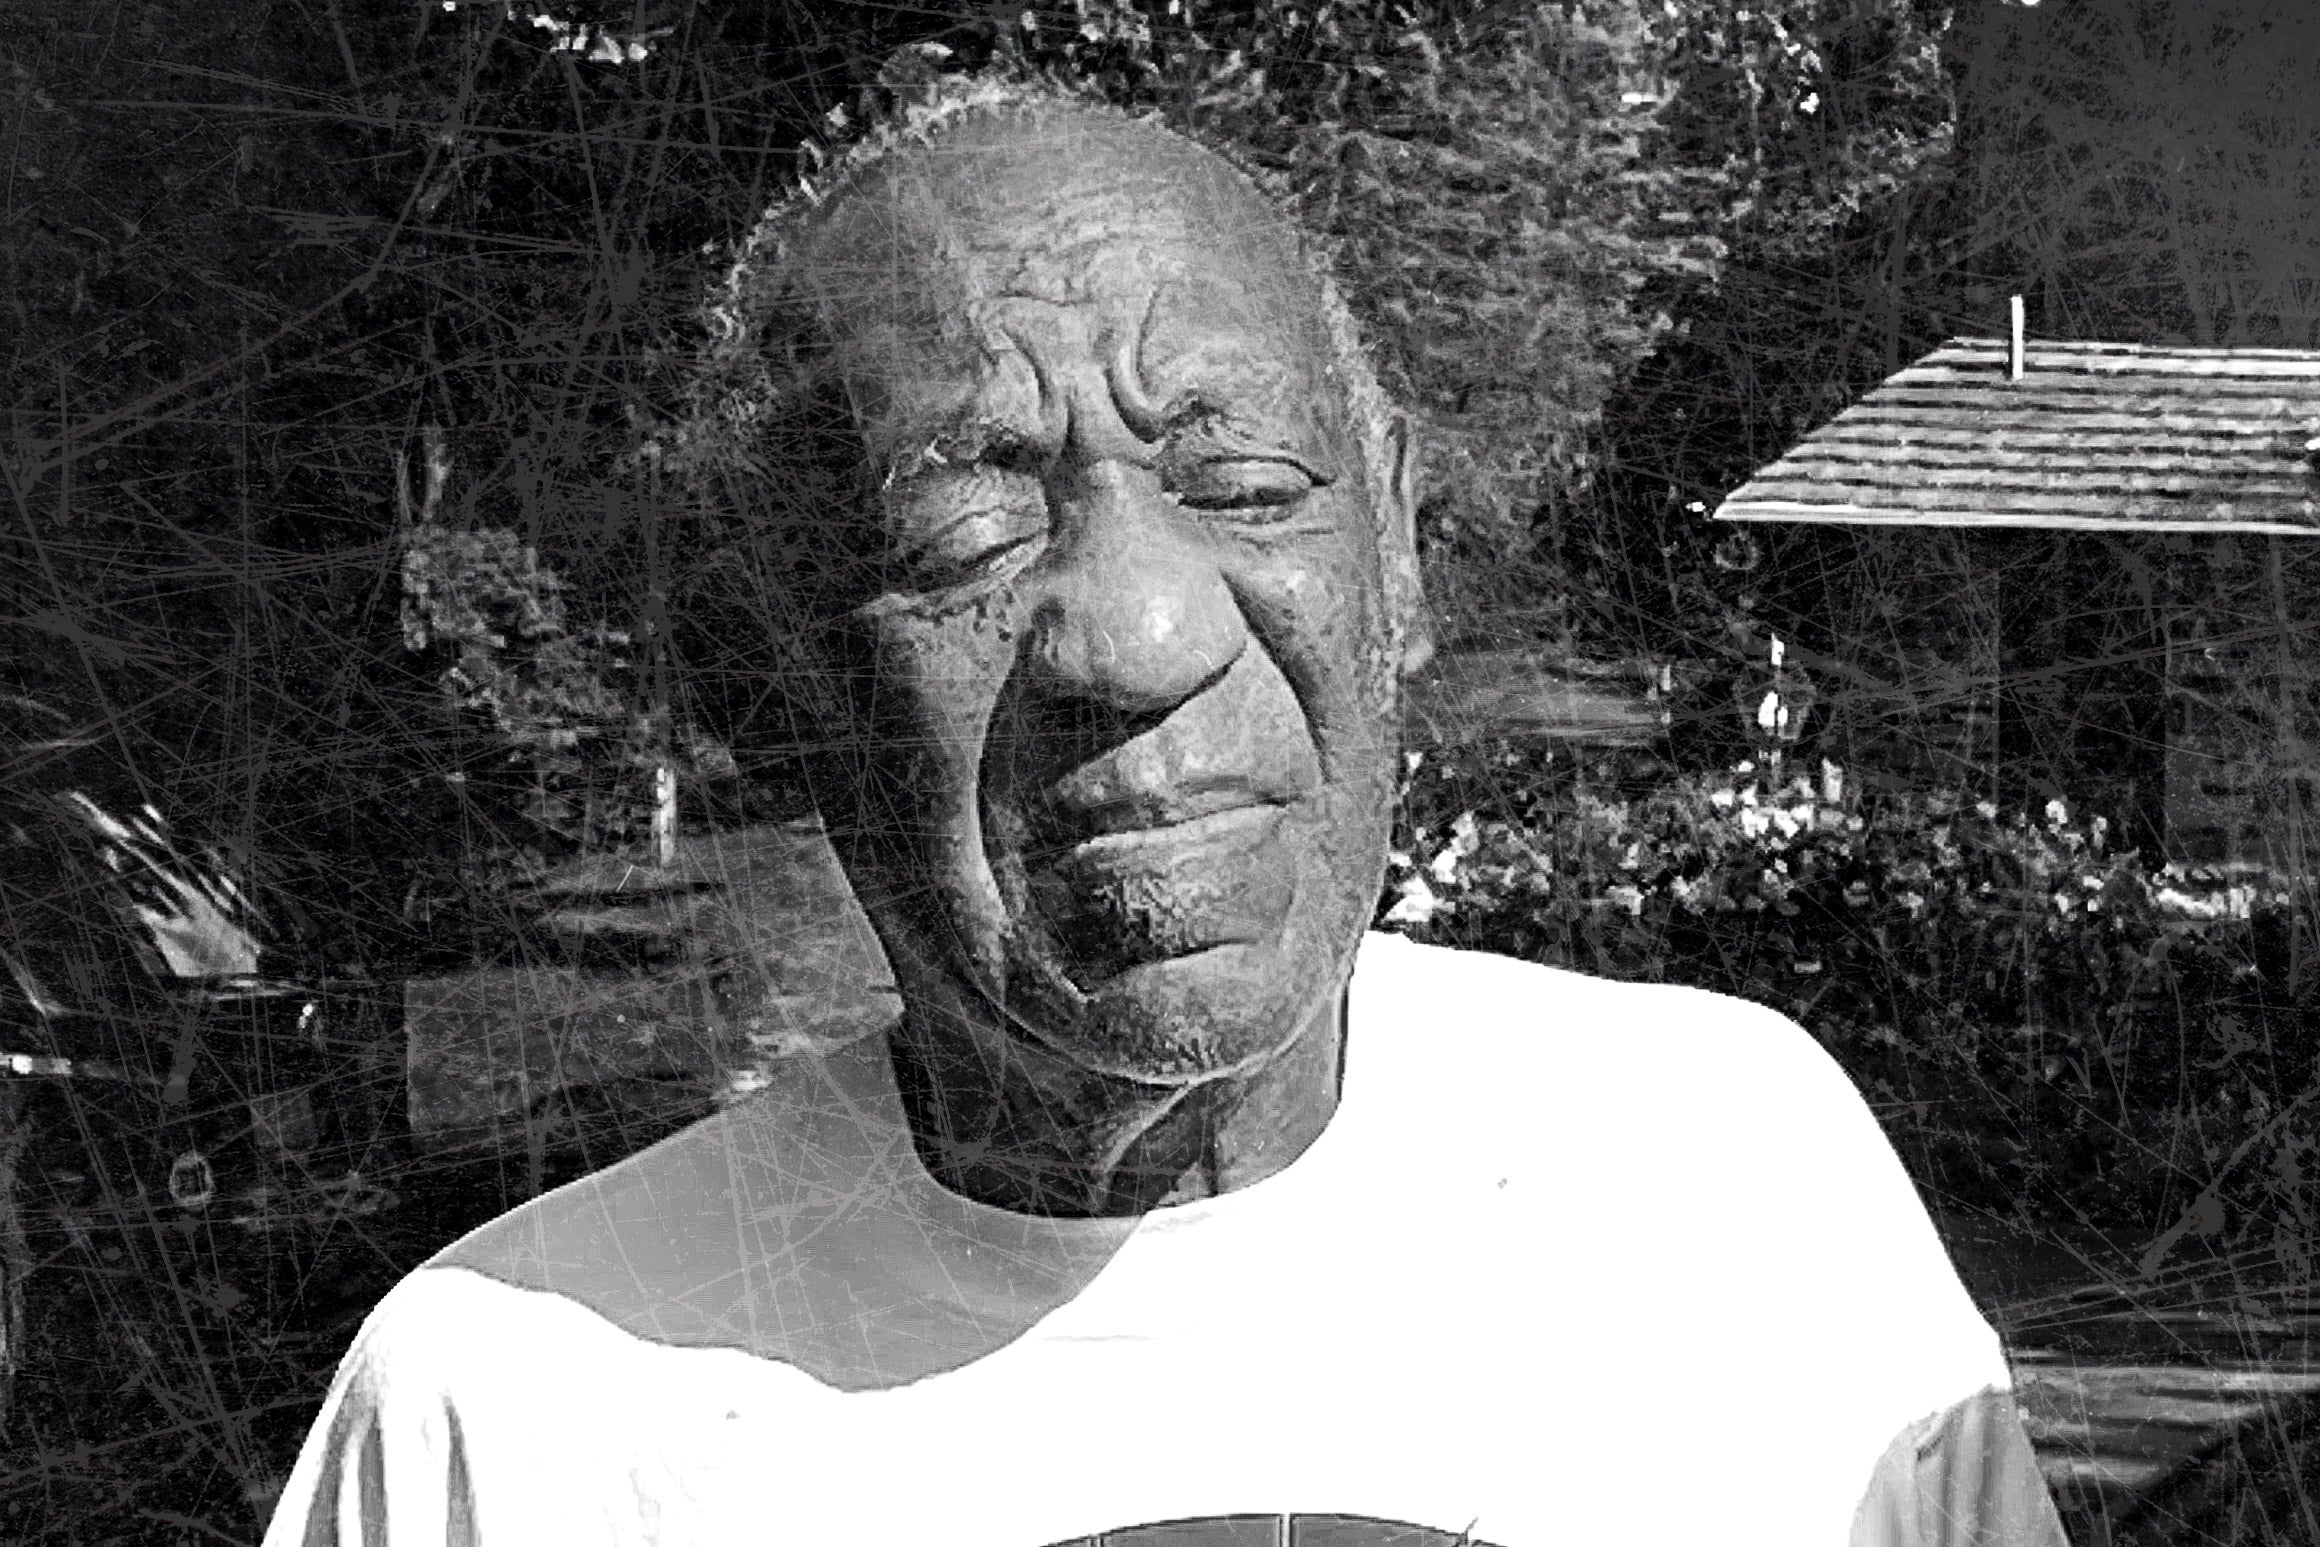 Bill Cosby is seen against a dark, woodsy black-and-white background with a shack to the right side.